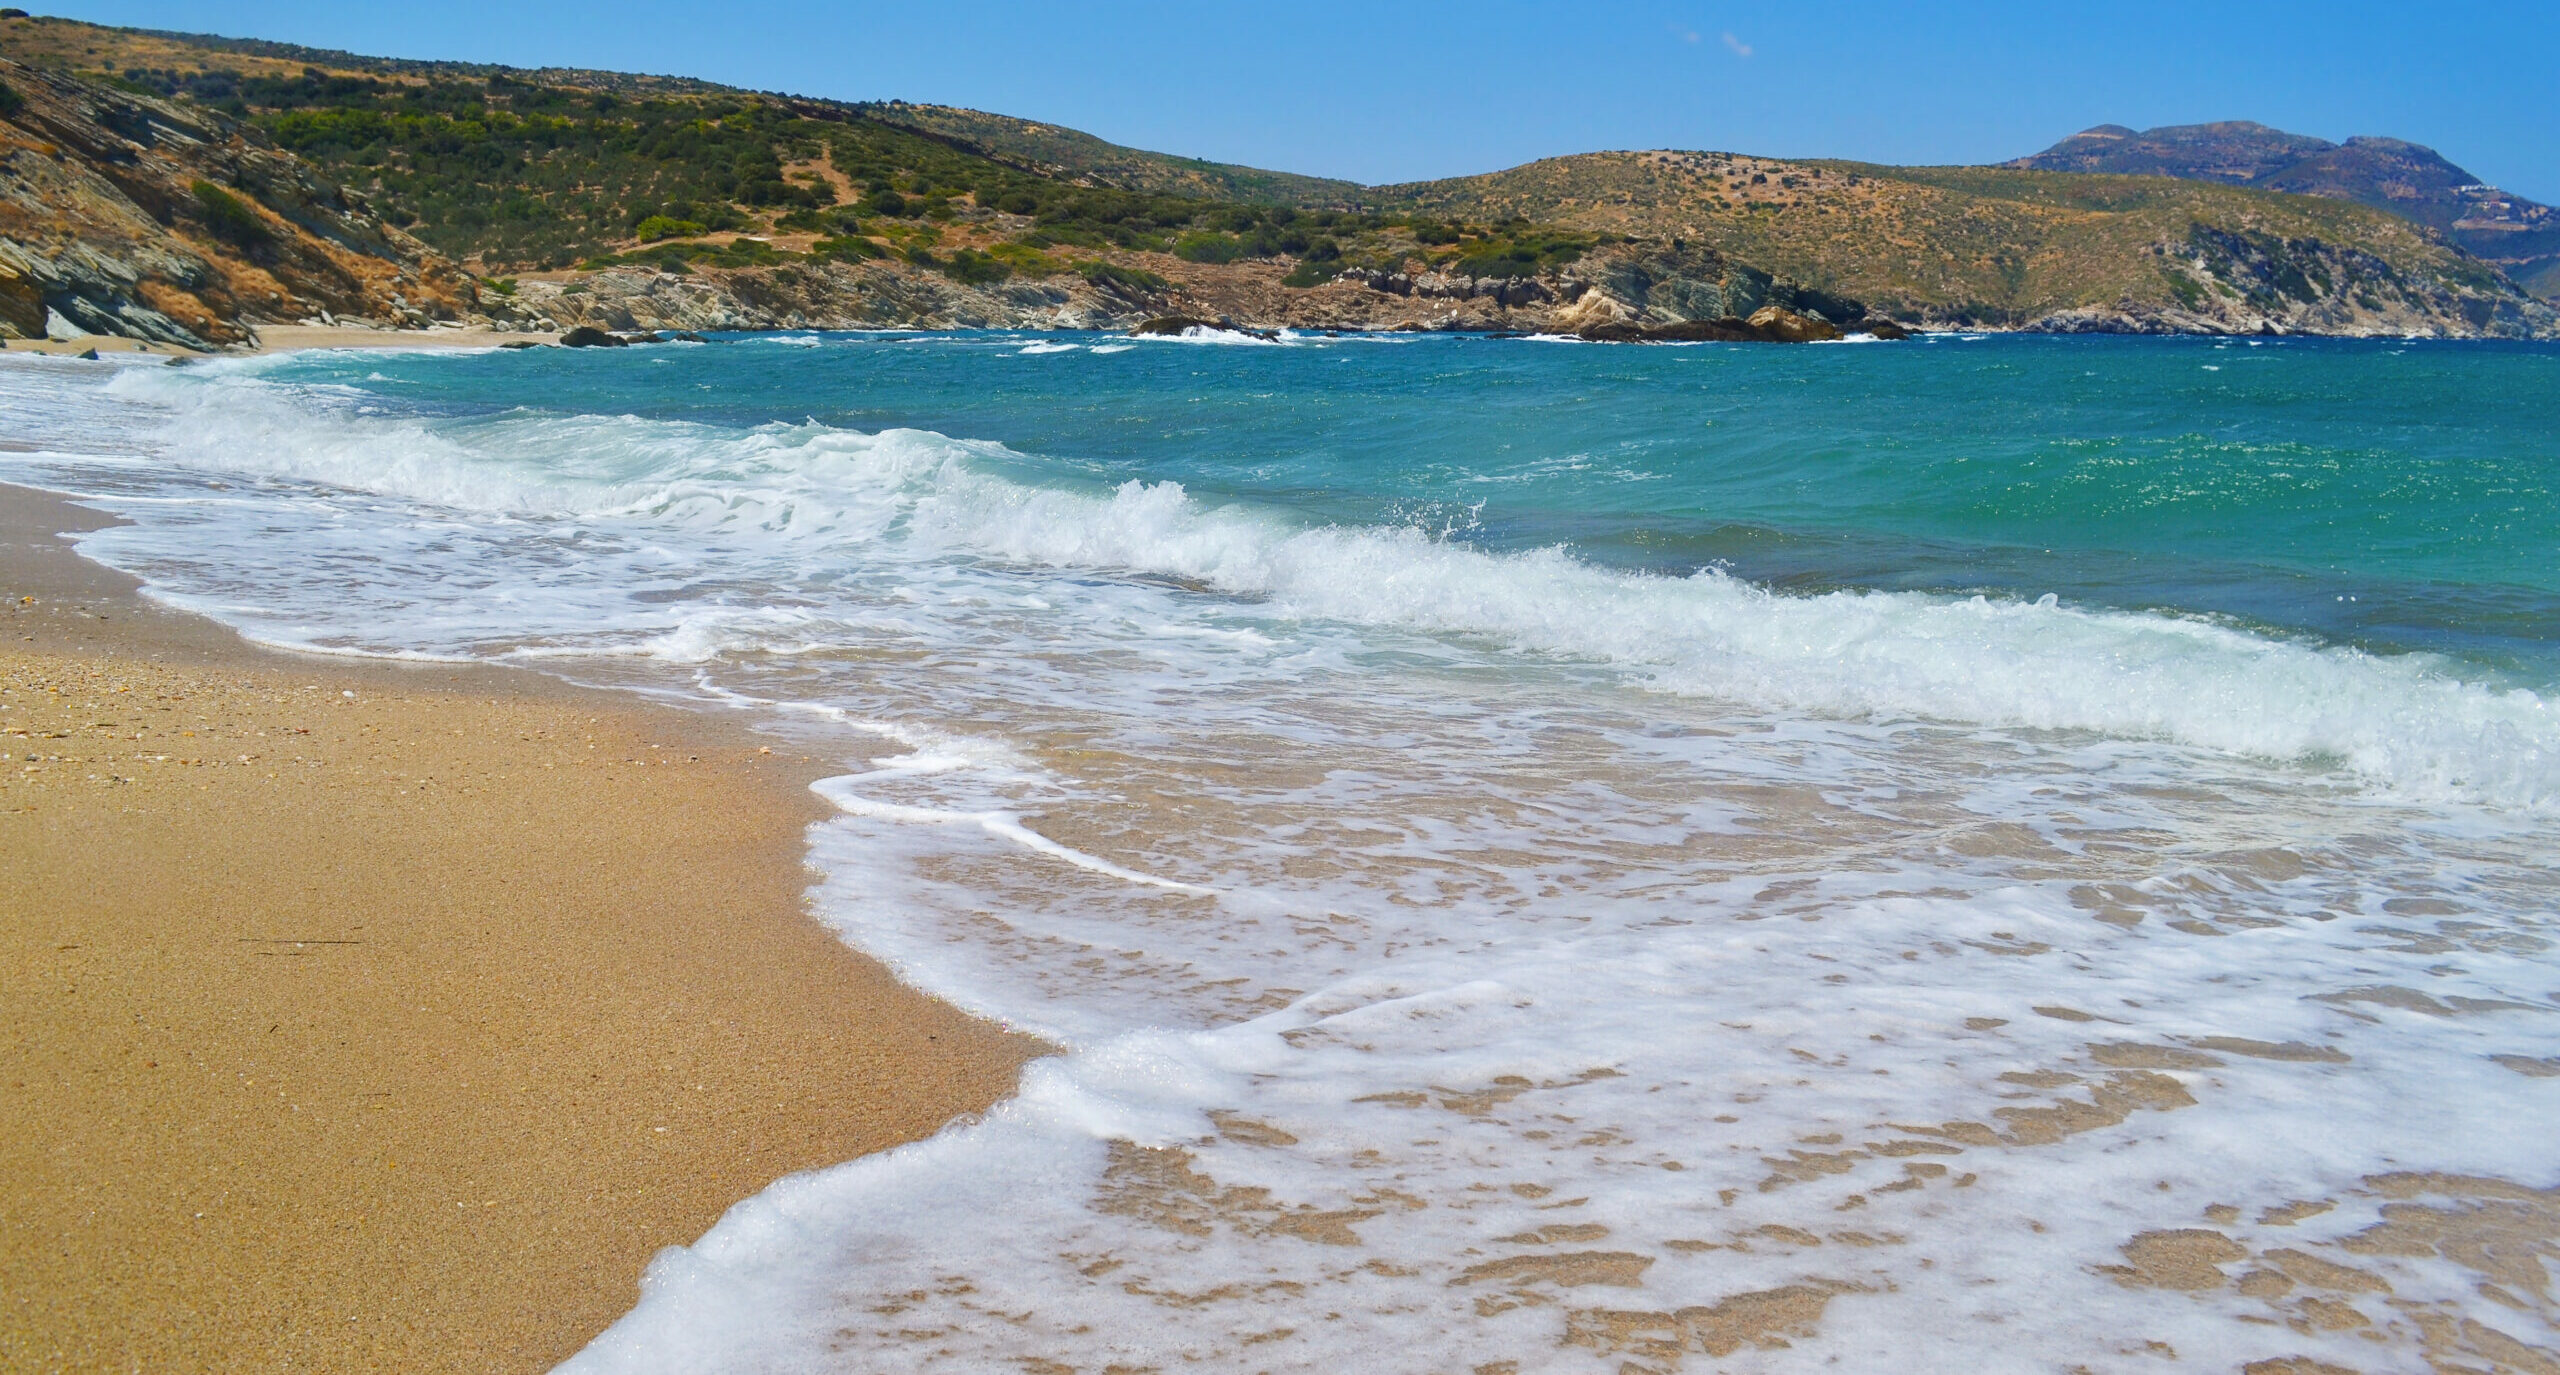 Korasida (the Daughter): The beach with turquoise waters just 2 hours away from Athens